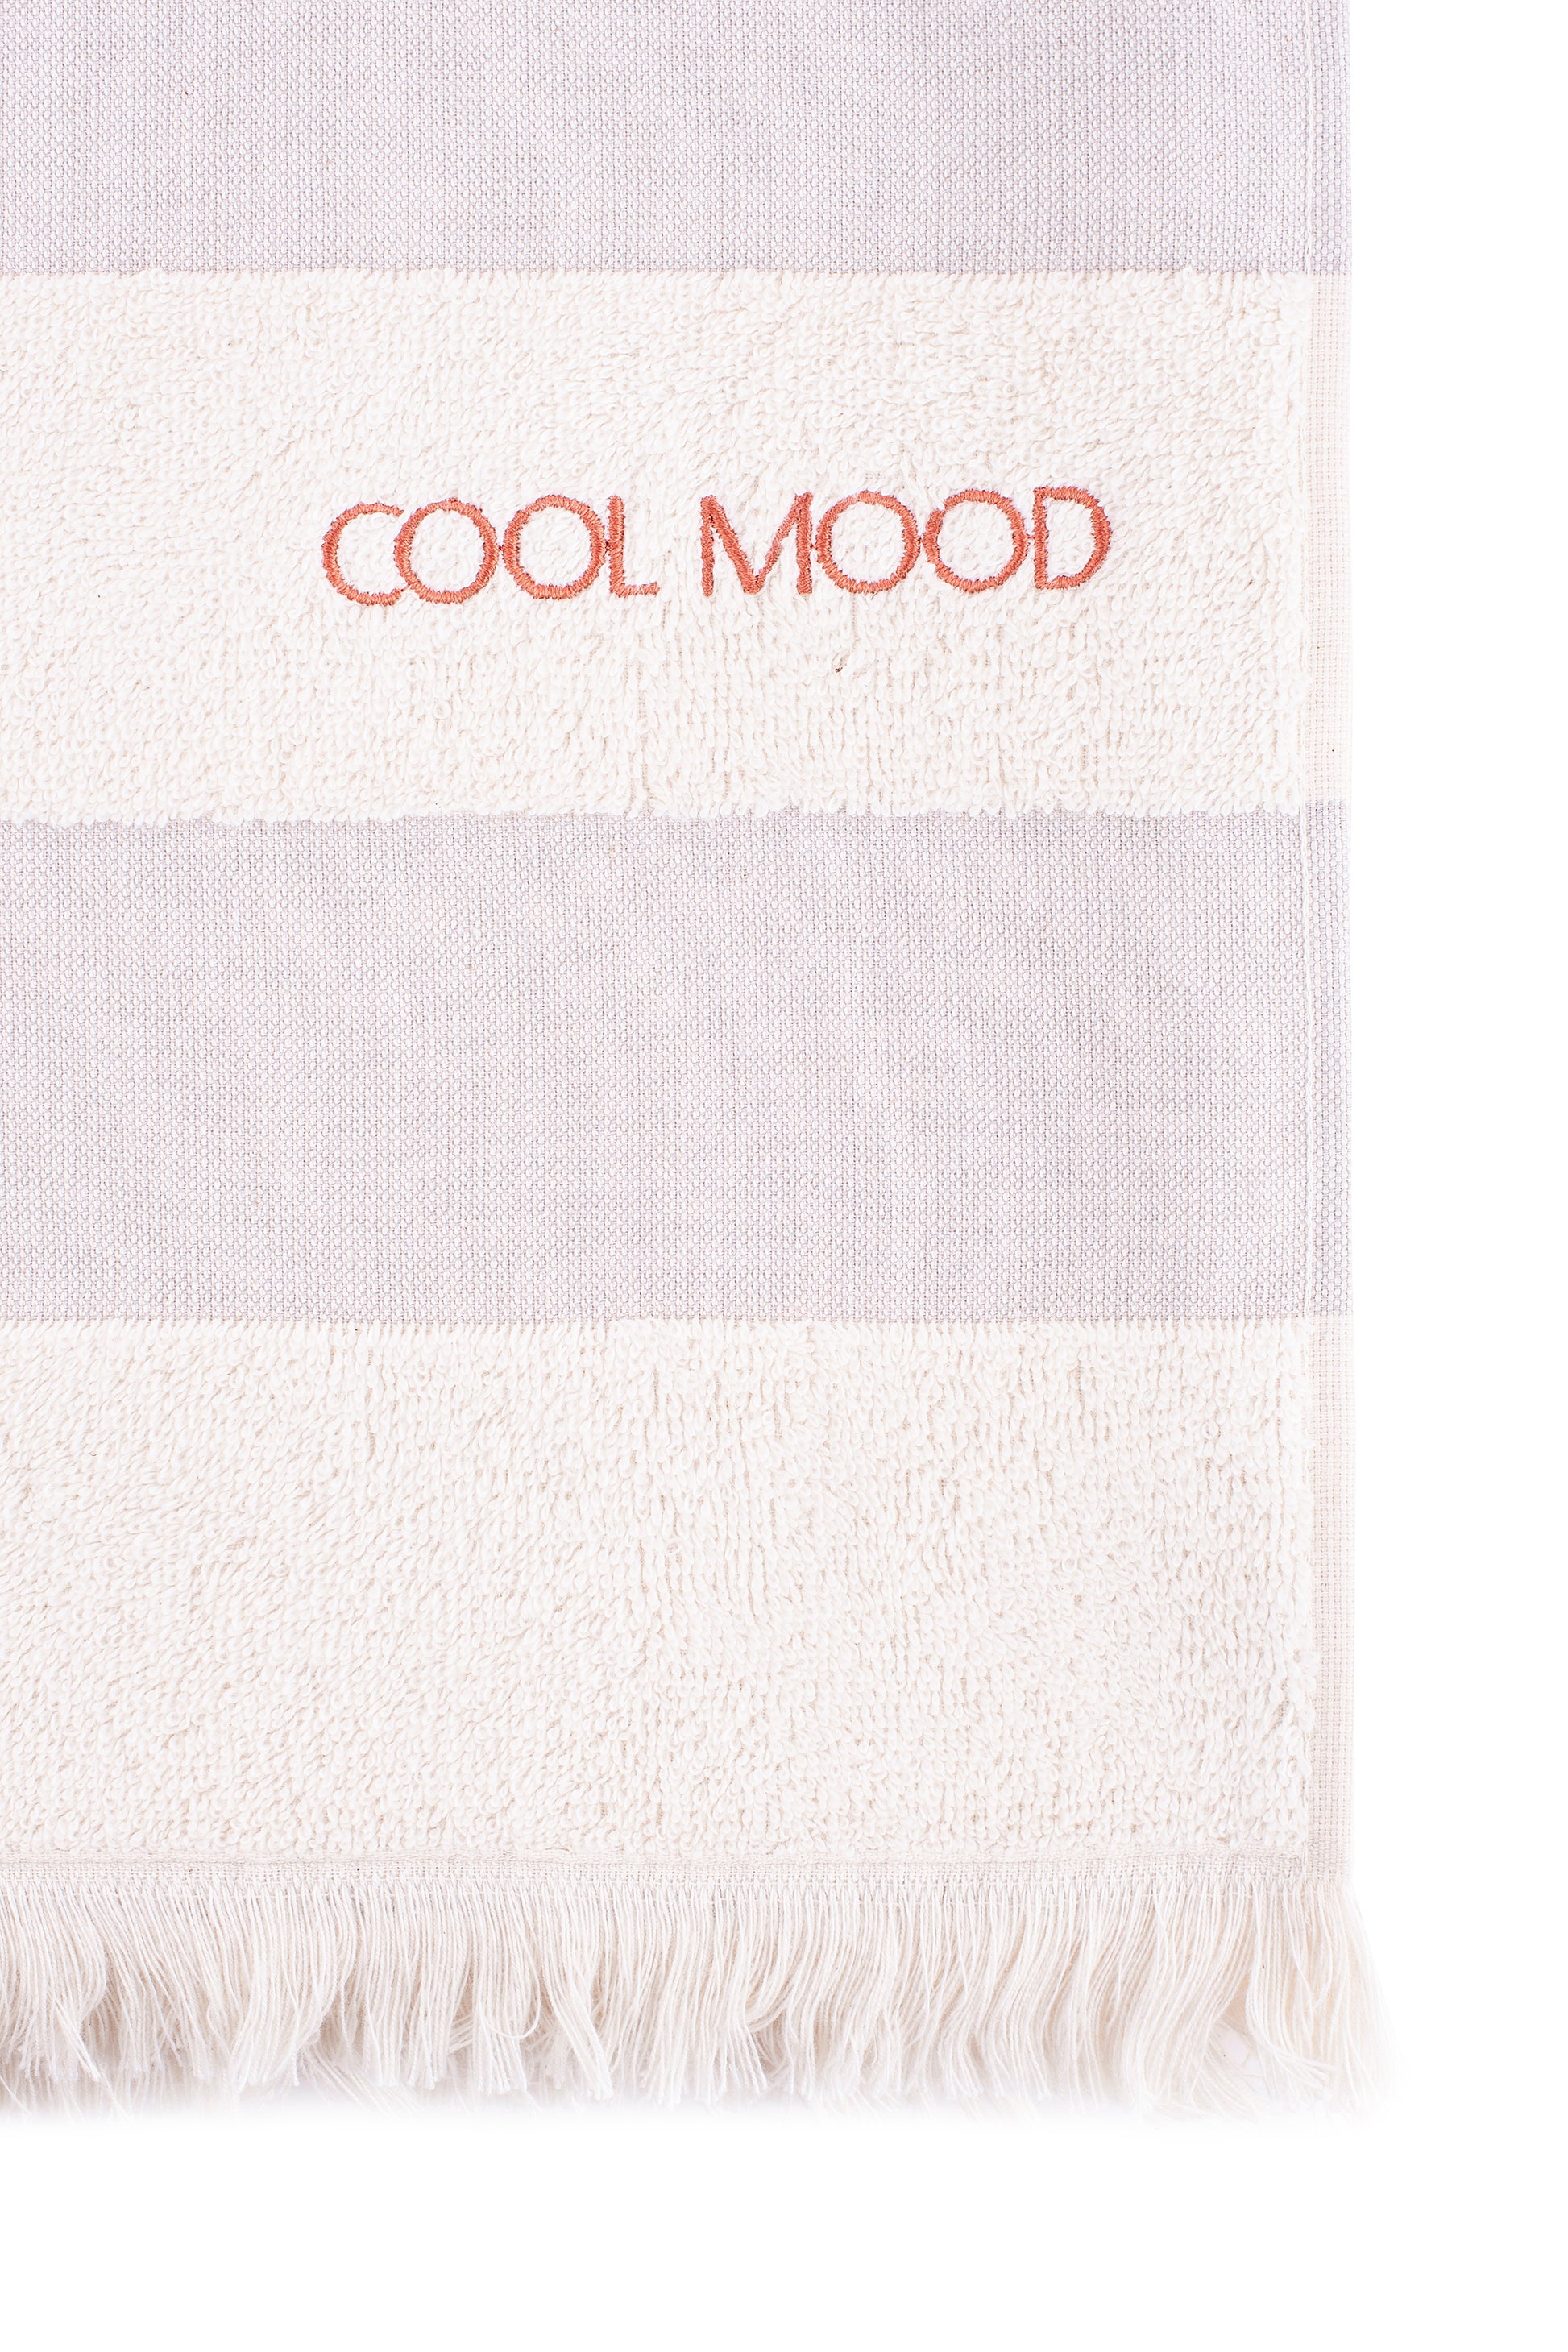 Beach towel in grey shade, with soft terry stripes, eyelash fringing detail and embroidery in rust